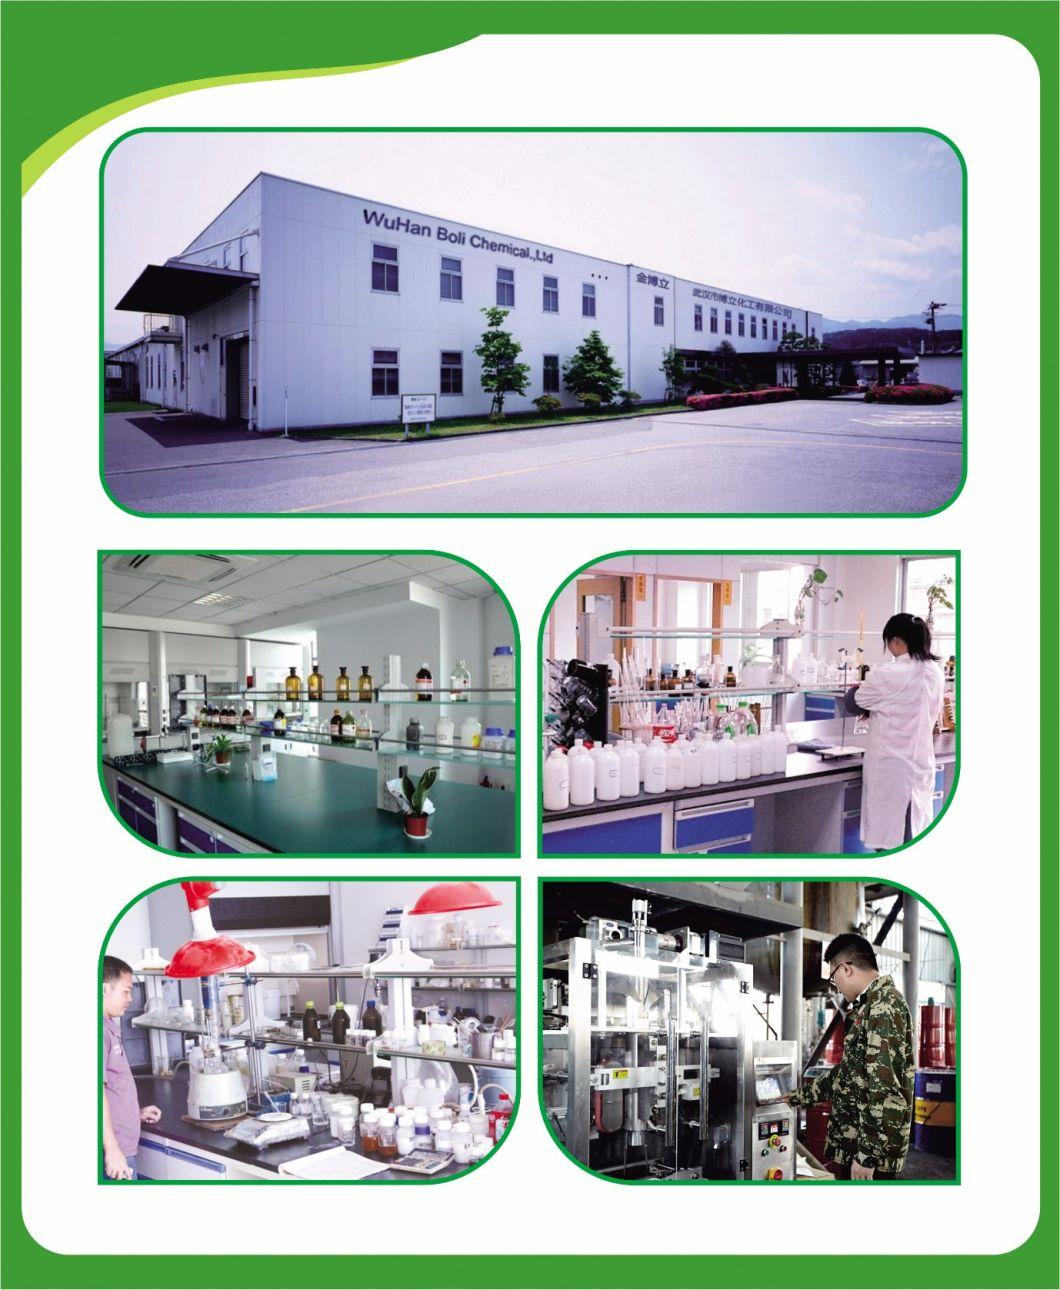 Constructional and Car Manufacturing Footwear Making Furniture Industry Favorite Good Low Cost Big Factory Glue